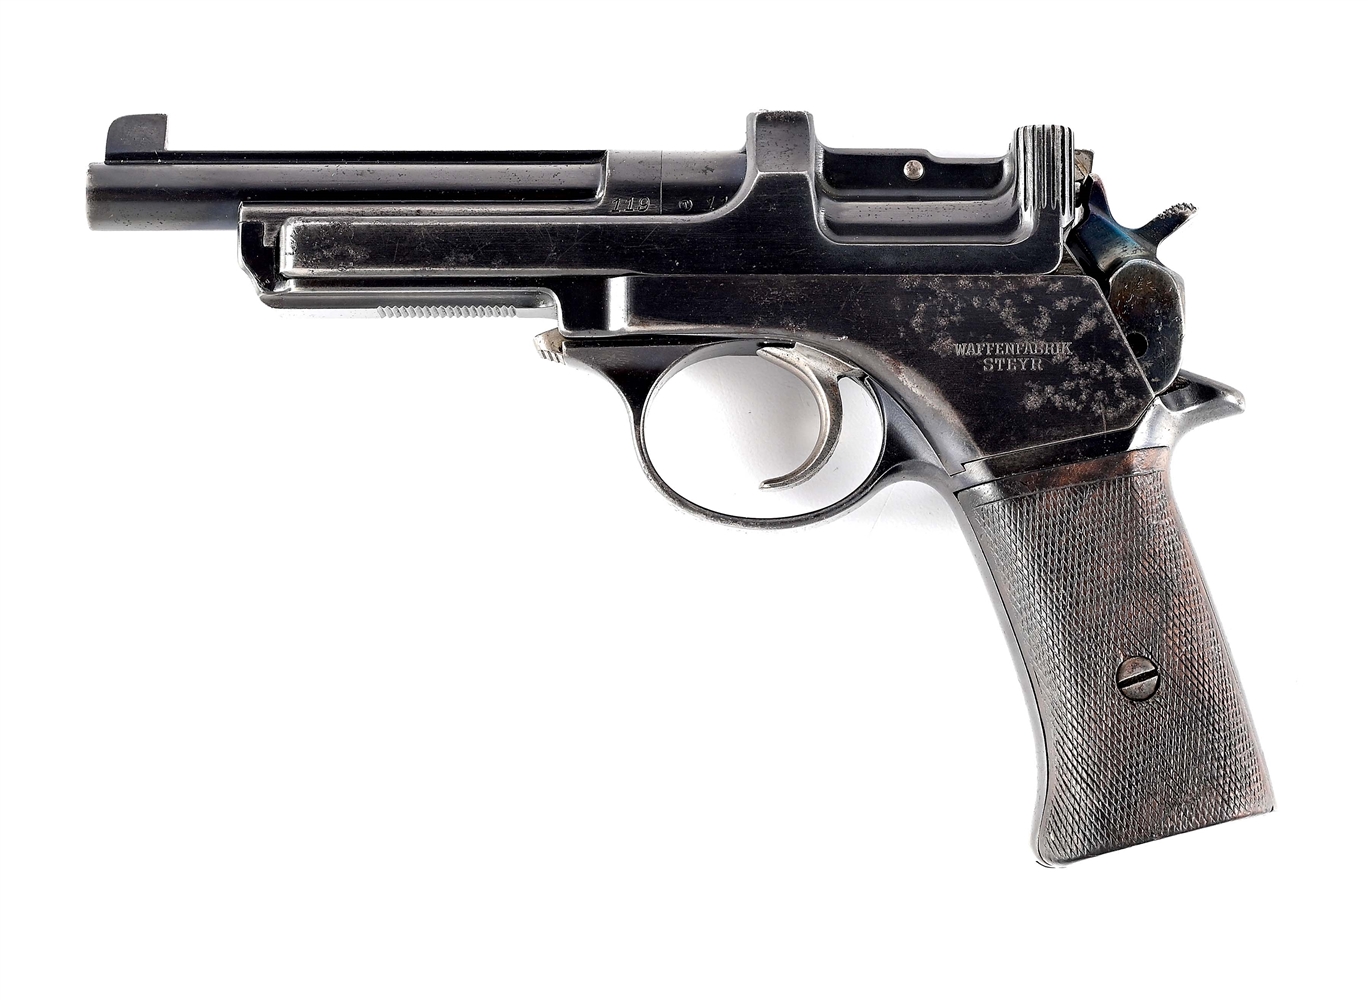 (C) SCARCE, DESIRABLE, & EXTREMELY EARLY STEYR MANNLICHER MODEL 1901 "POCKET" SEMI-AUTOMATIC PISTOL.